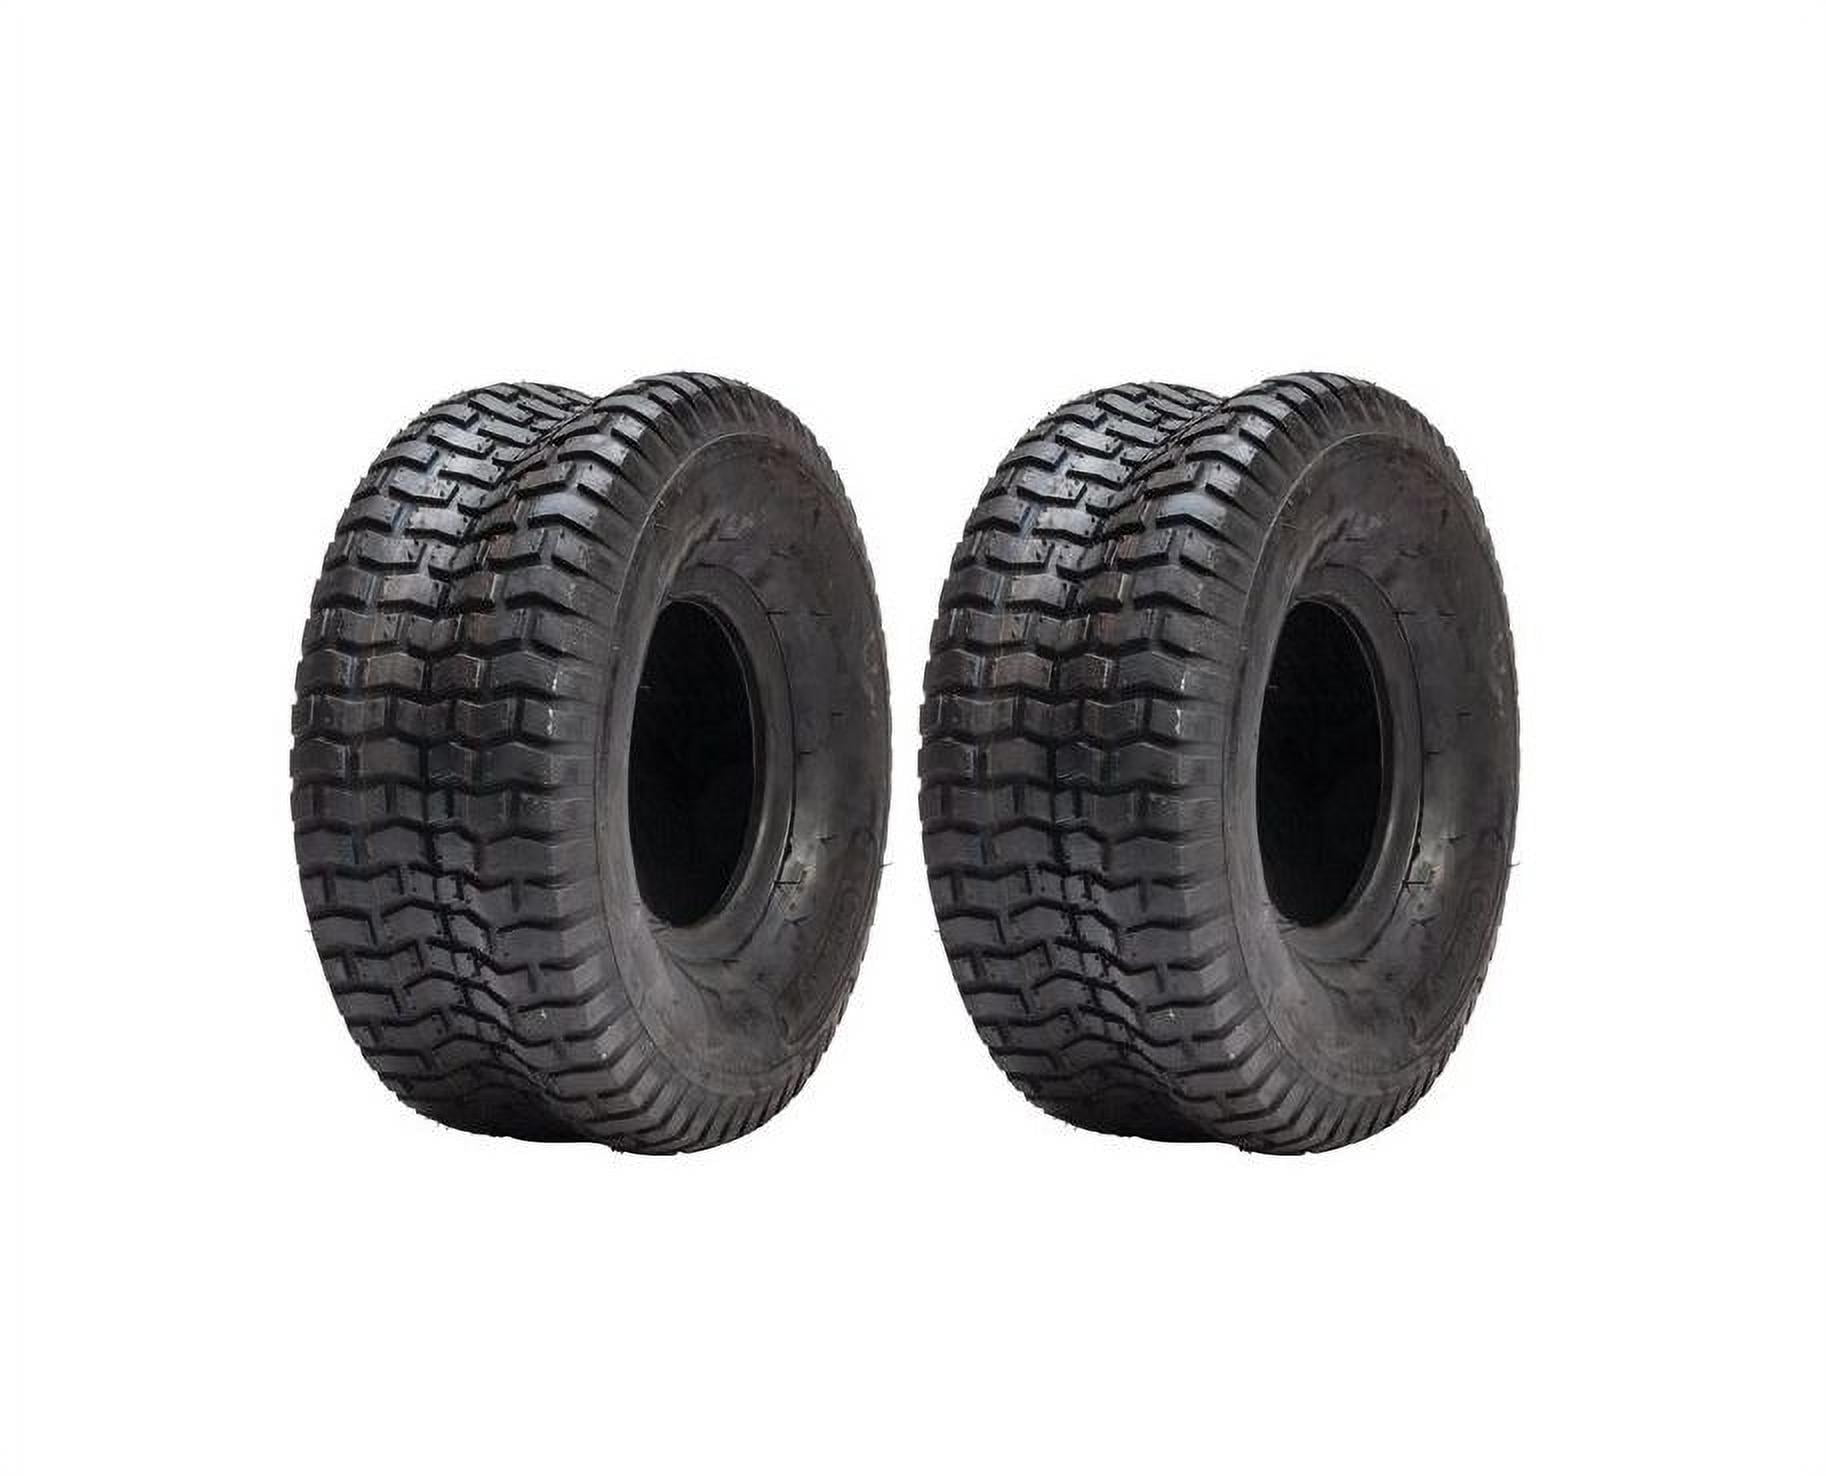 TWO 13x5.00-6 Turf Tires for Garden Tractor Lawn Mower Riding Mower 4 Ply Rated